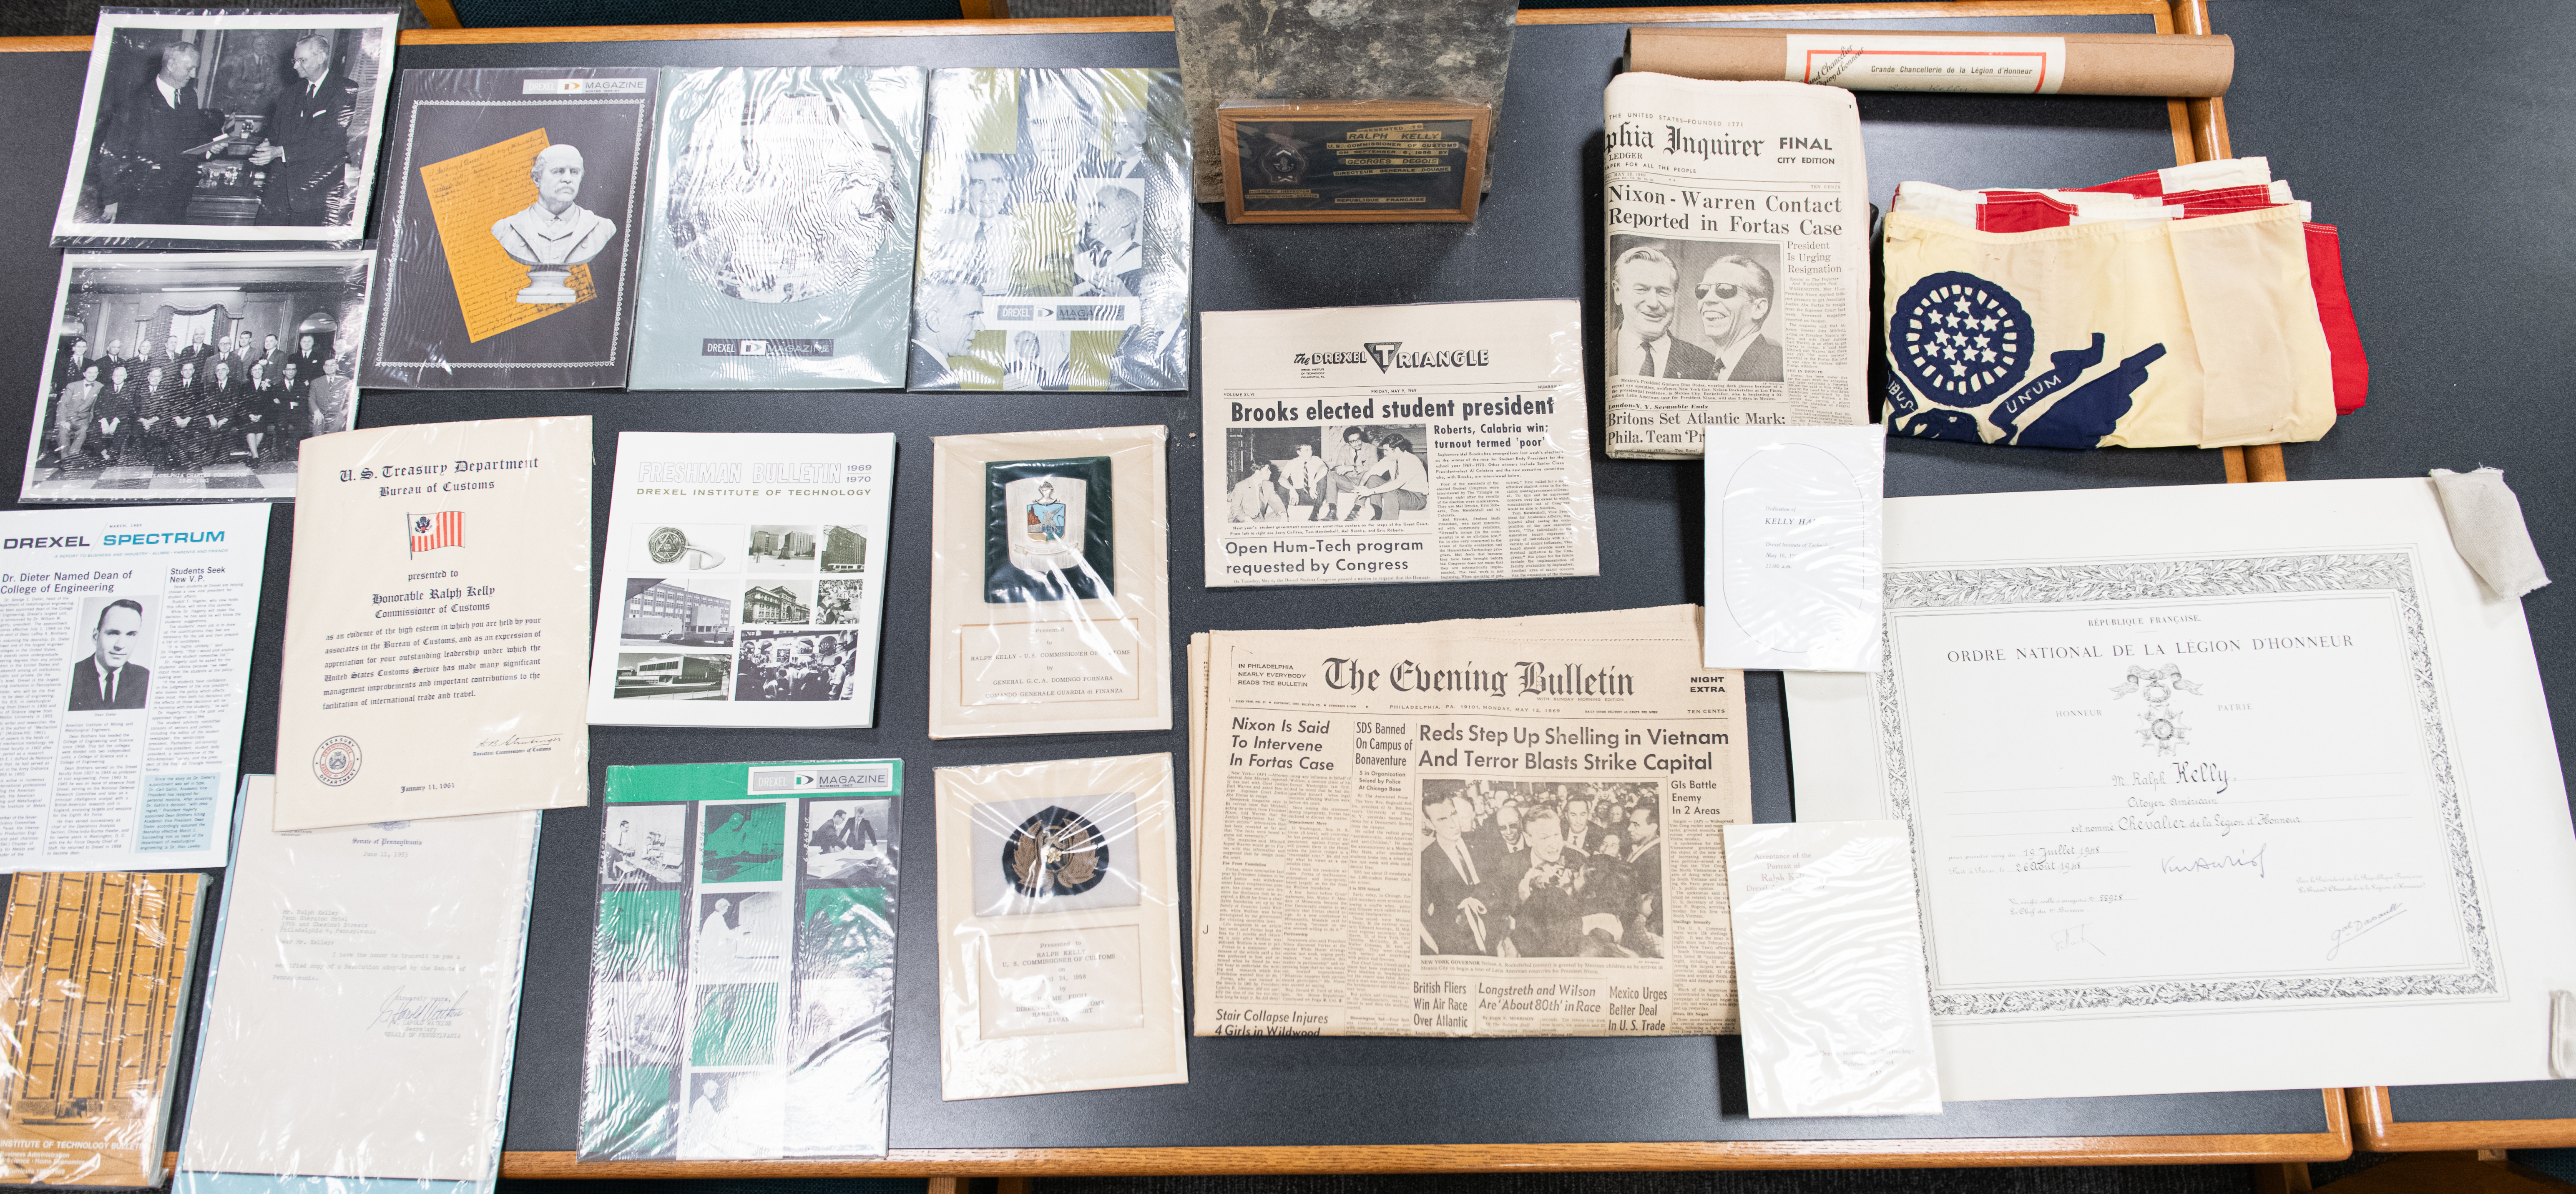 Objects from time capsule, including newspapers, Drexel publications, photographs, certificates, and a flag